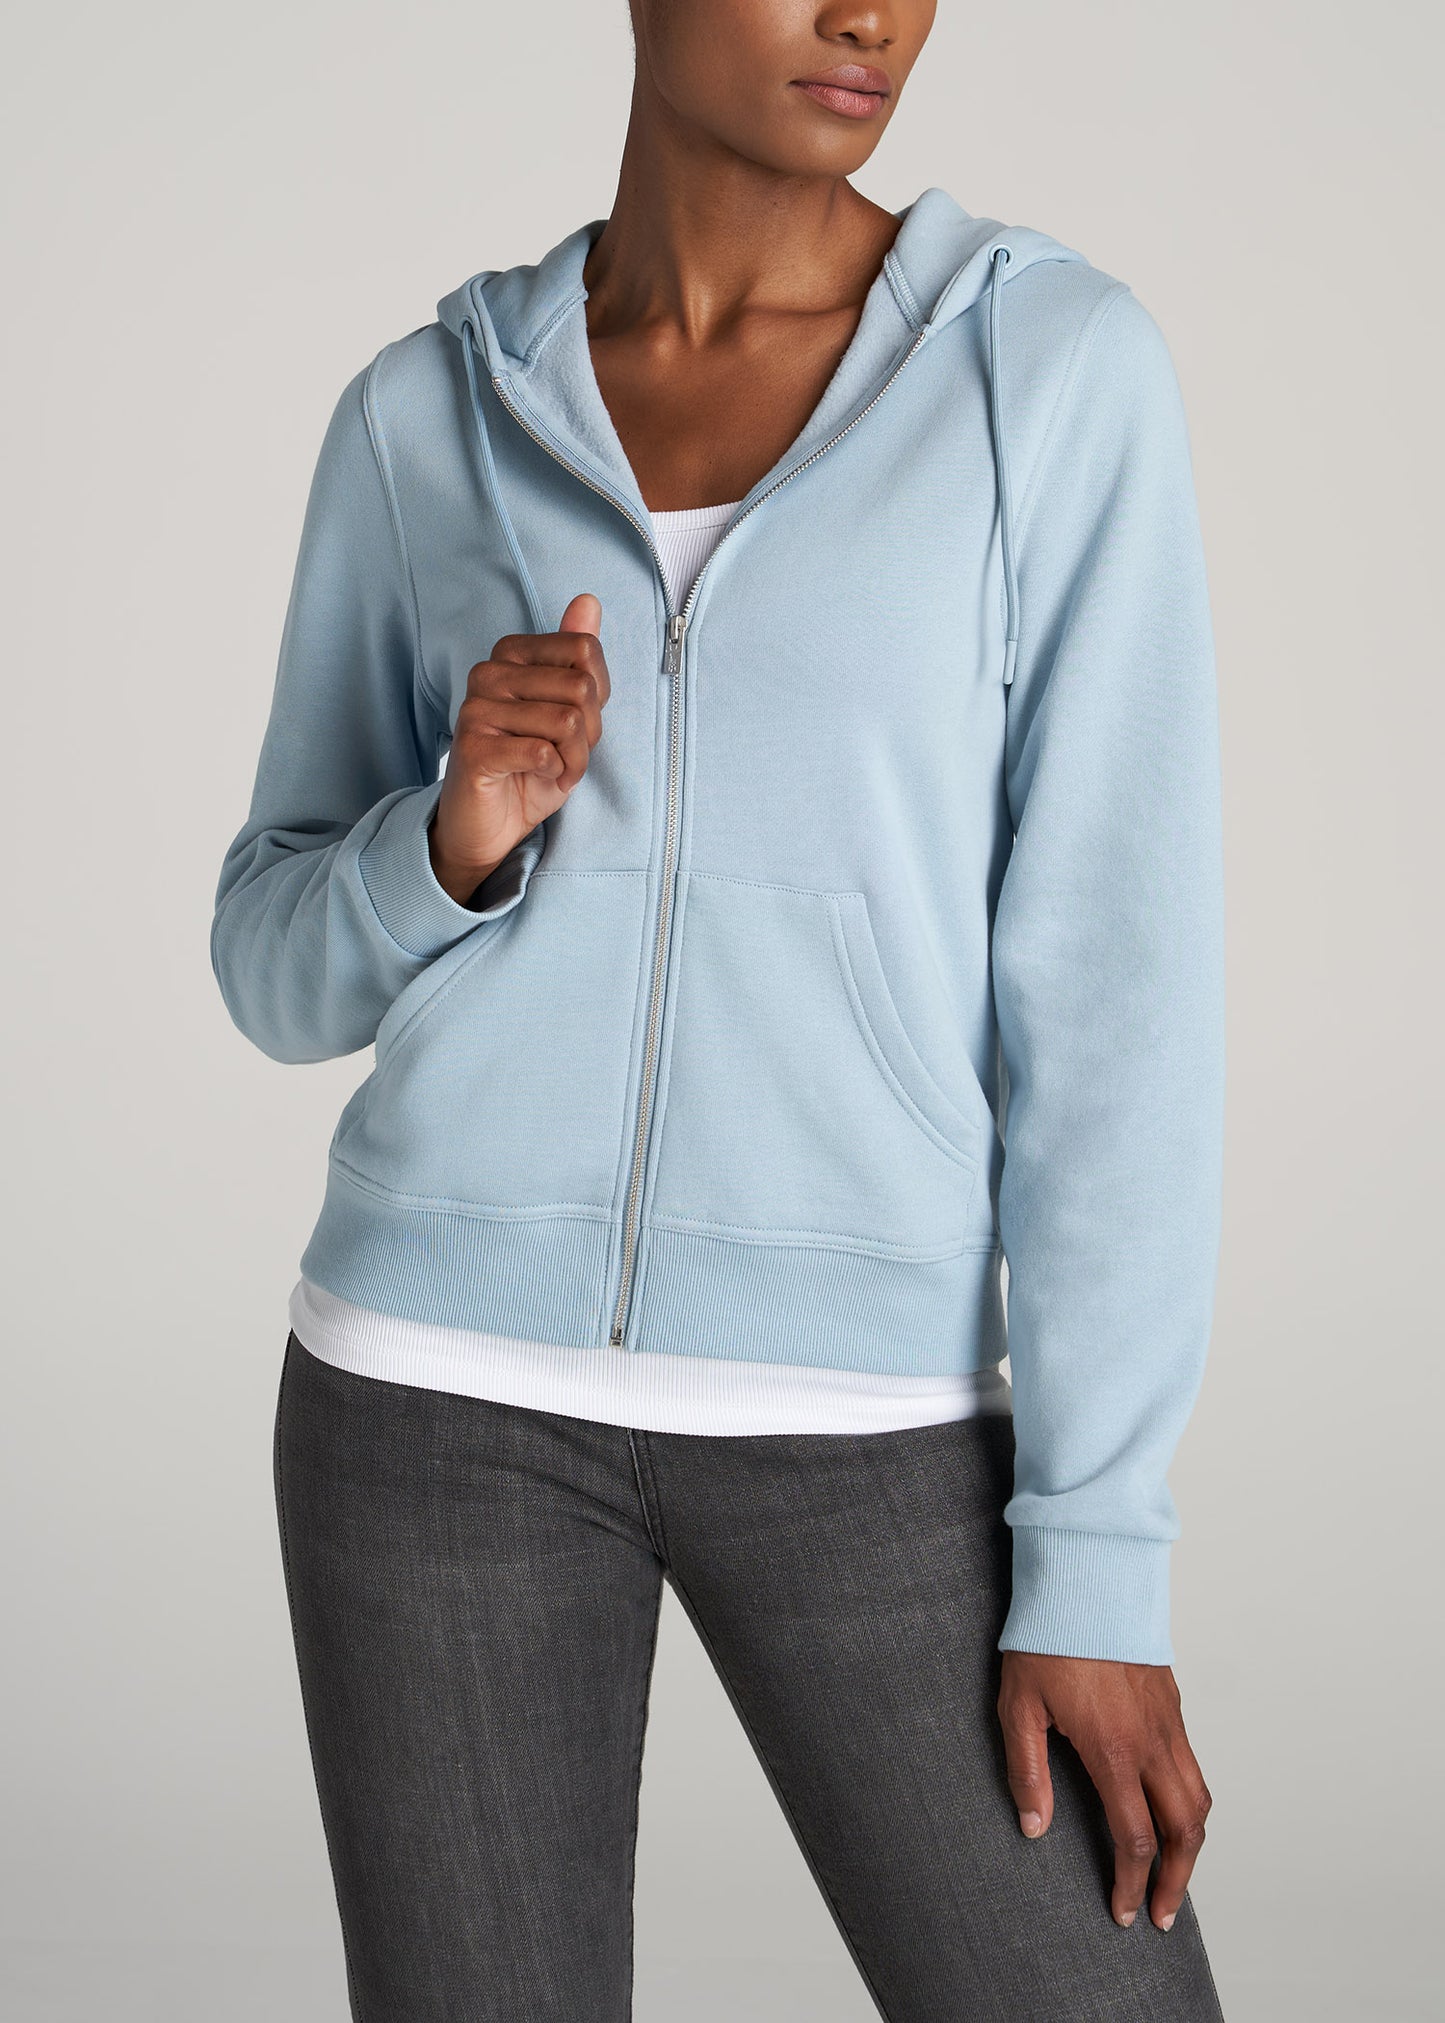       American-Tall-Women-WKND-Full-Zip-Hoodie-Partly-Cloudy-front